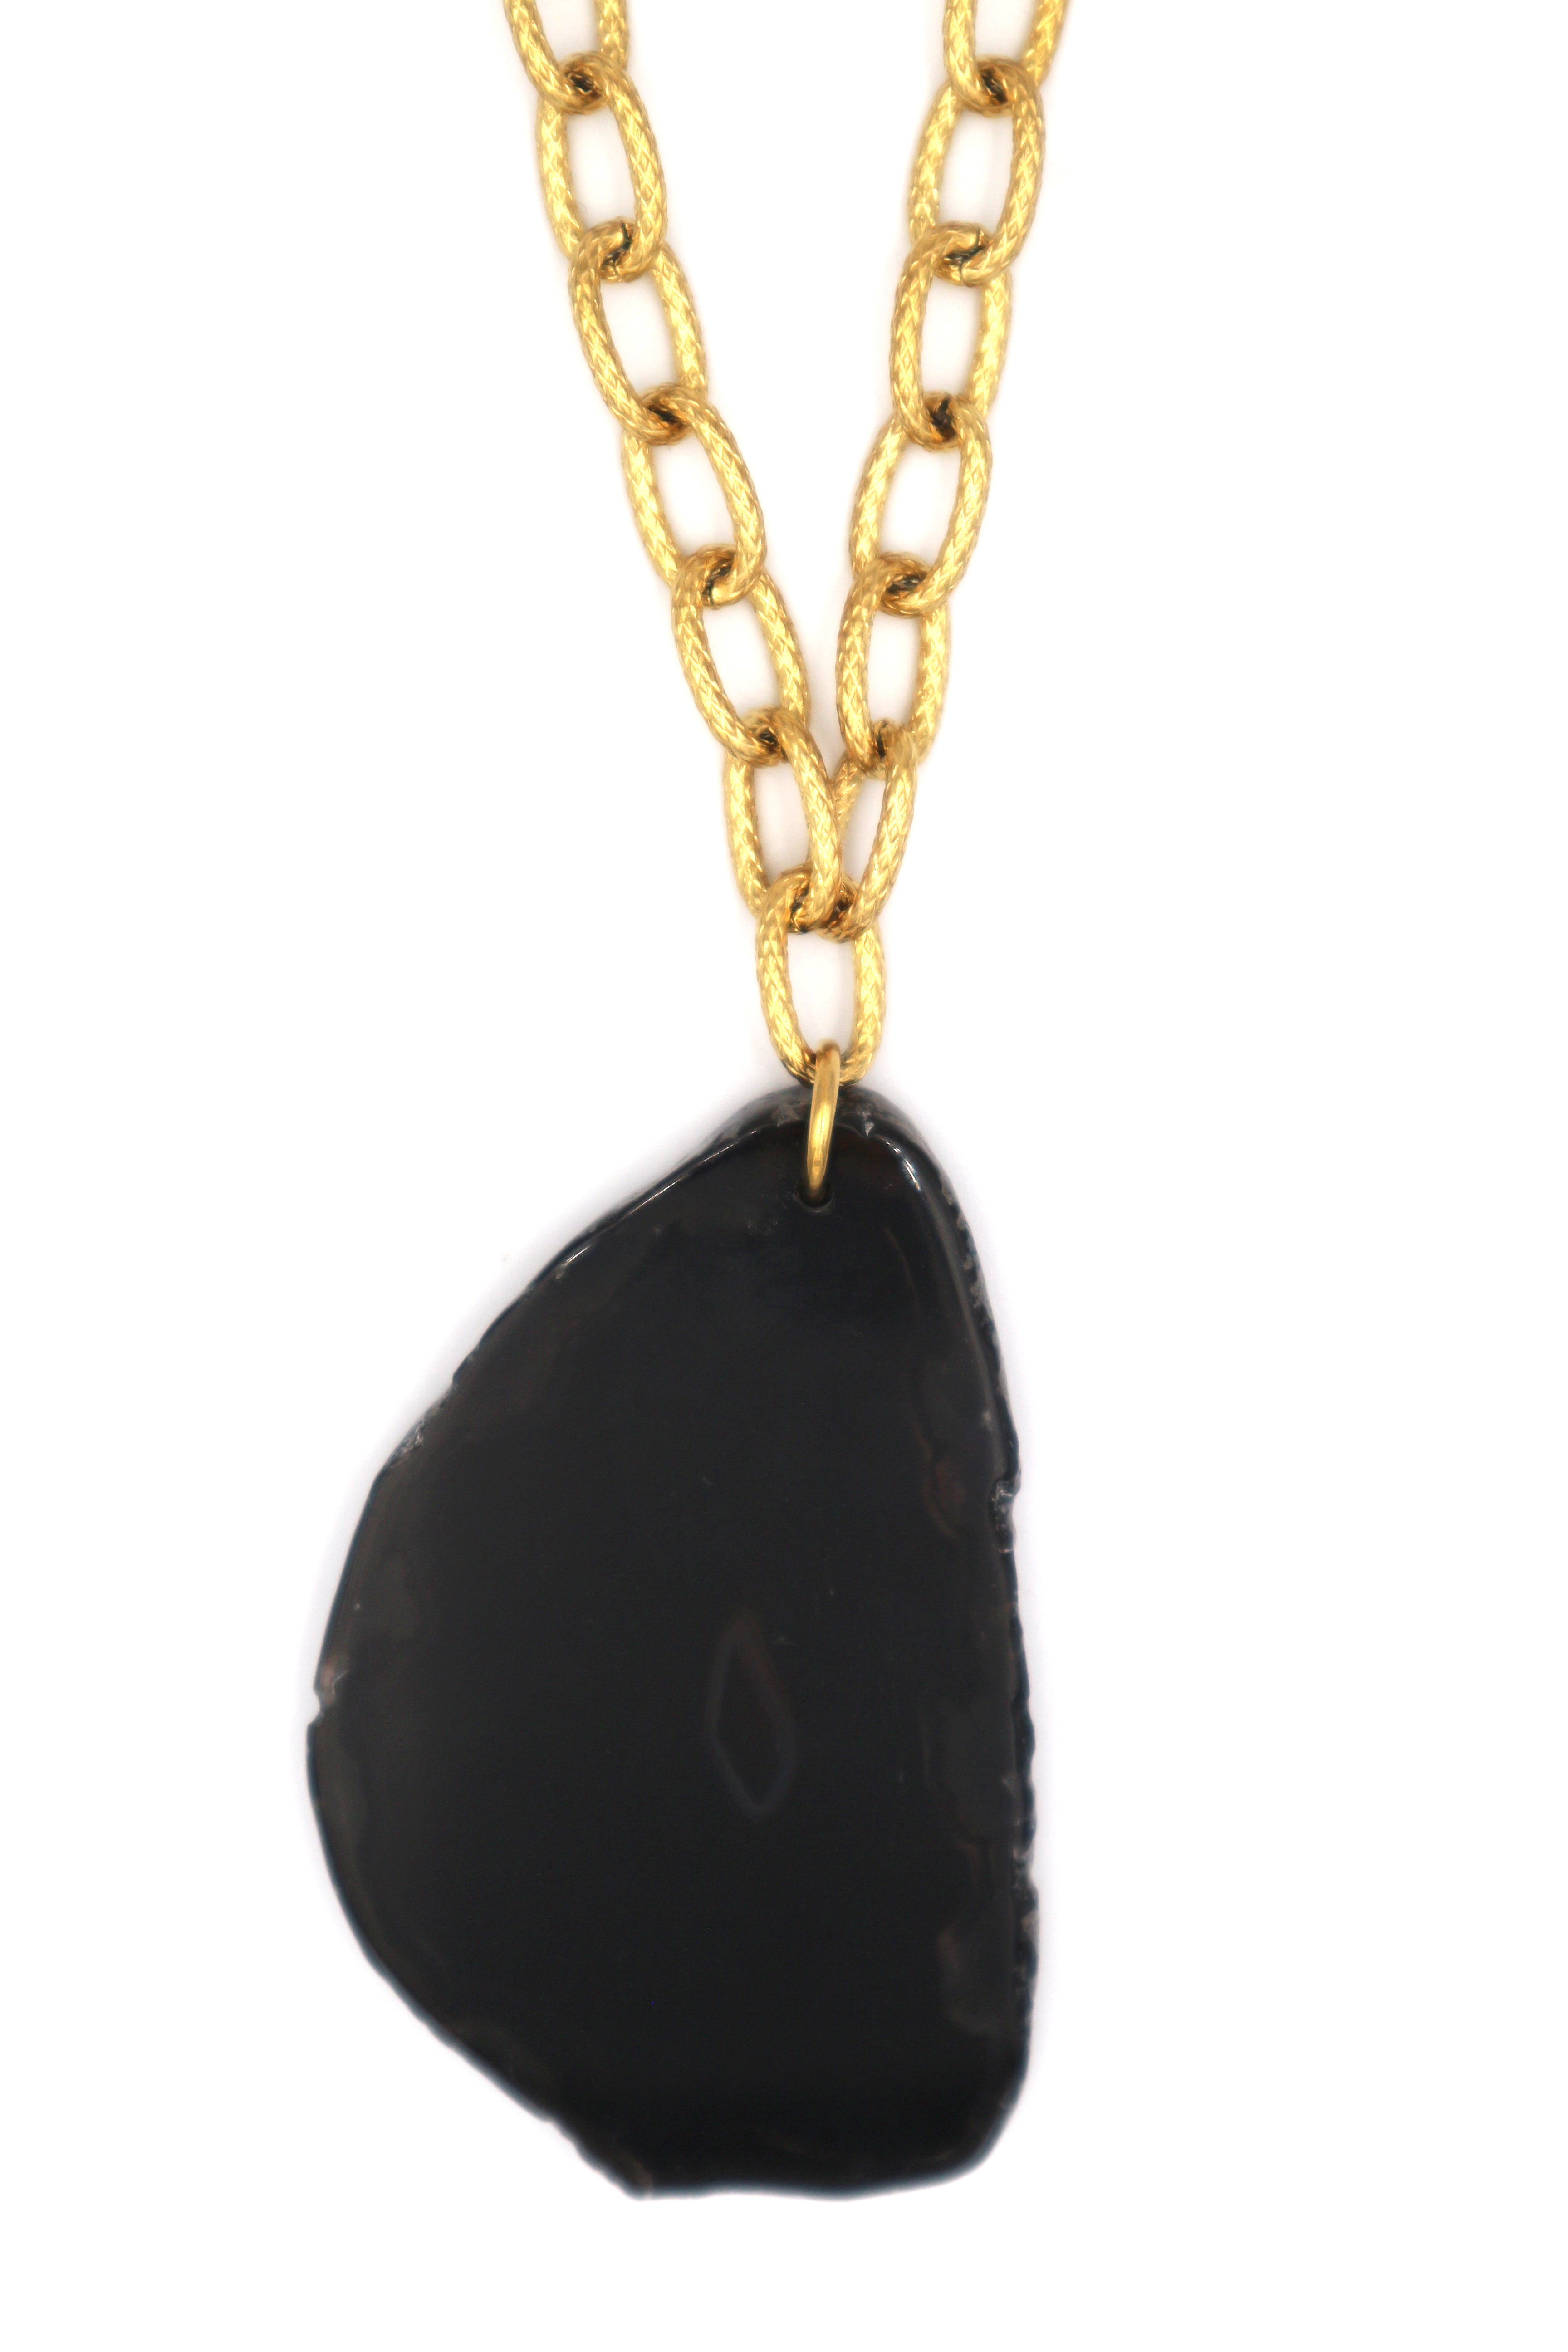 ROCA // The Agate Necklace